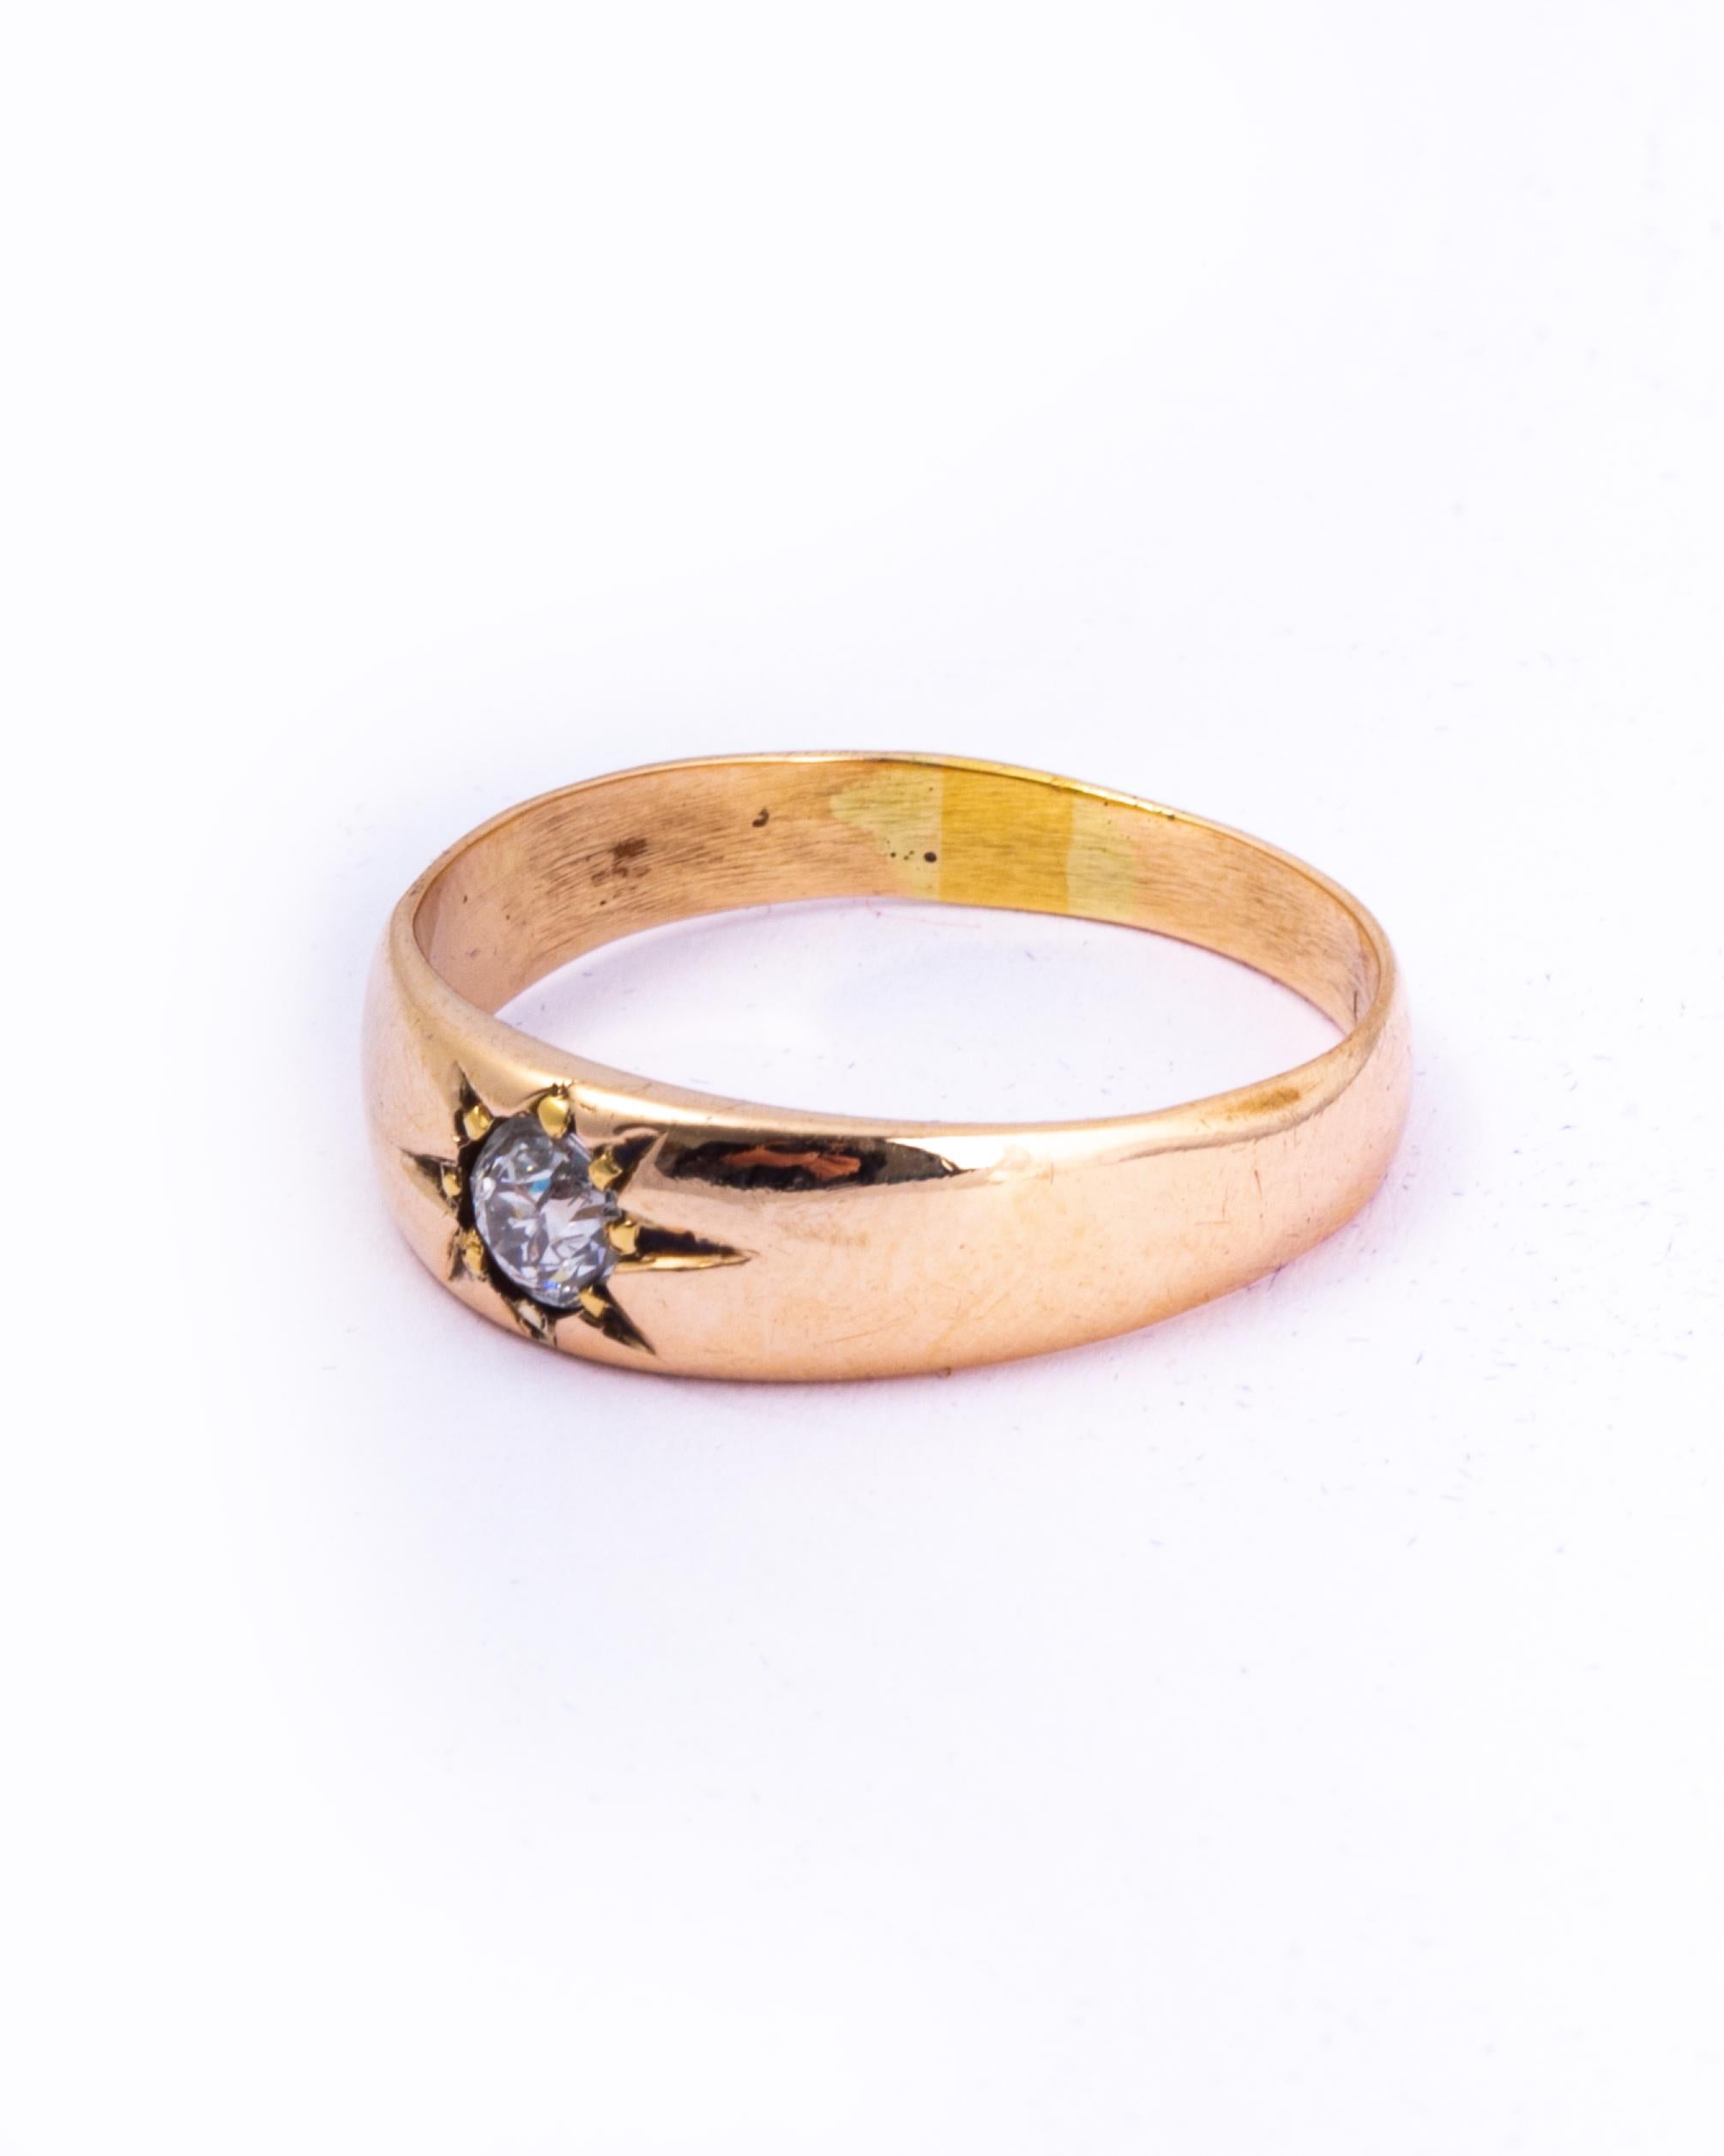 This gypsy band holds a 25pt diamond which is bright, white and has a stunning sparkle. the stone is set in a star setting and the band is modelled in 9ct gold. 

Ring Size: O 1/2 ot 7 1/2 
Band Width: 5.5mm

Weight: 2.9g